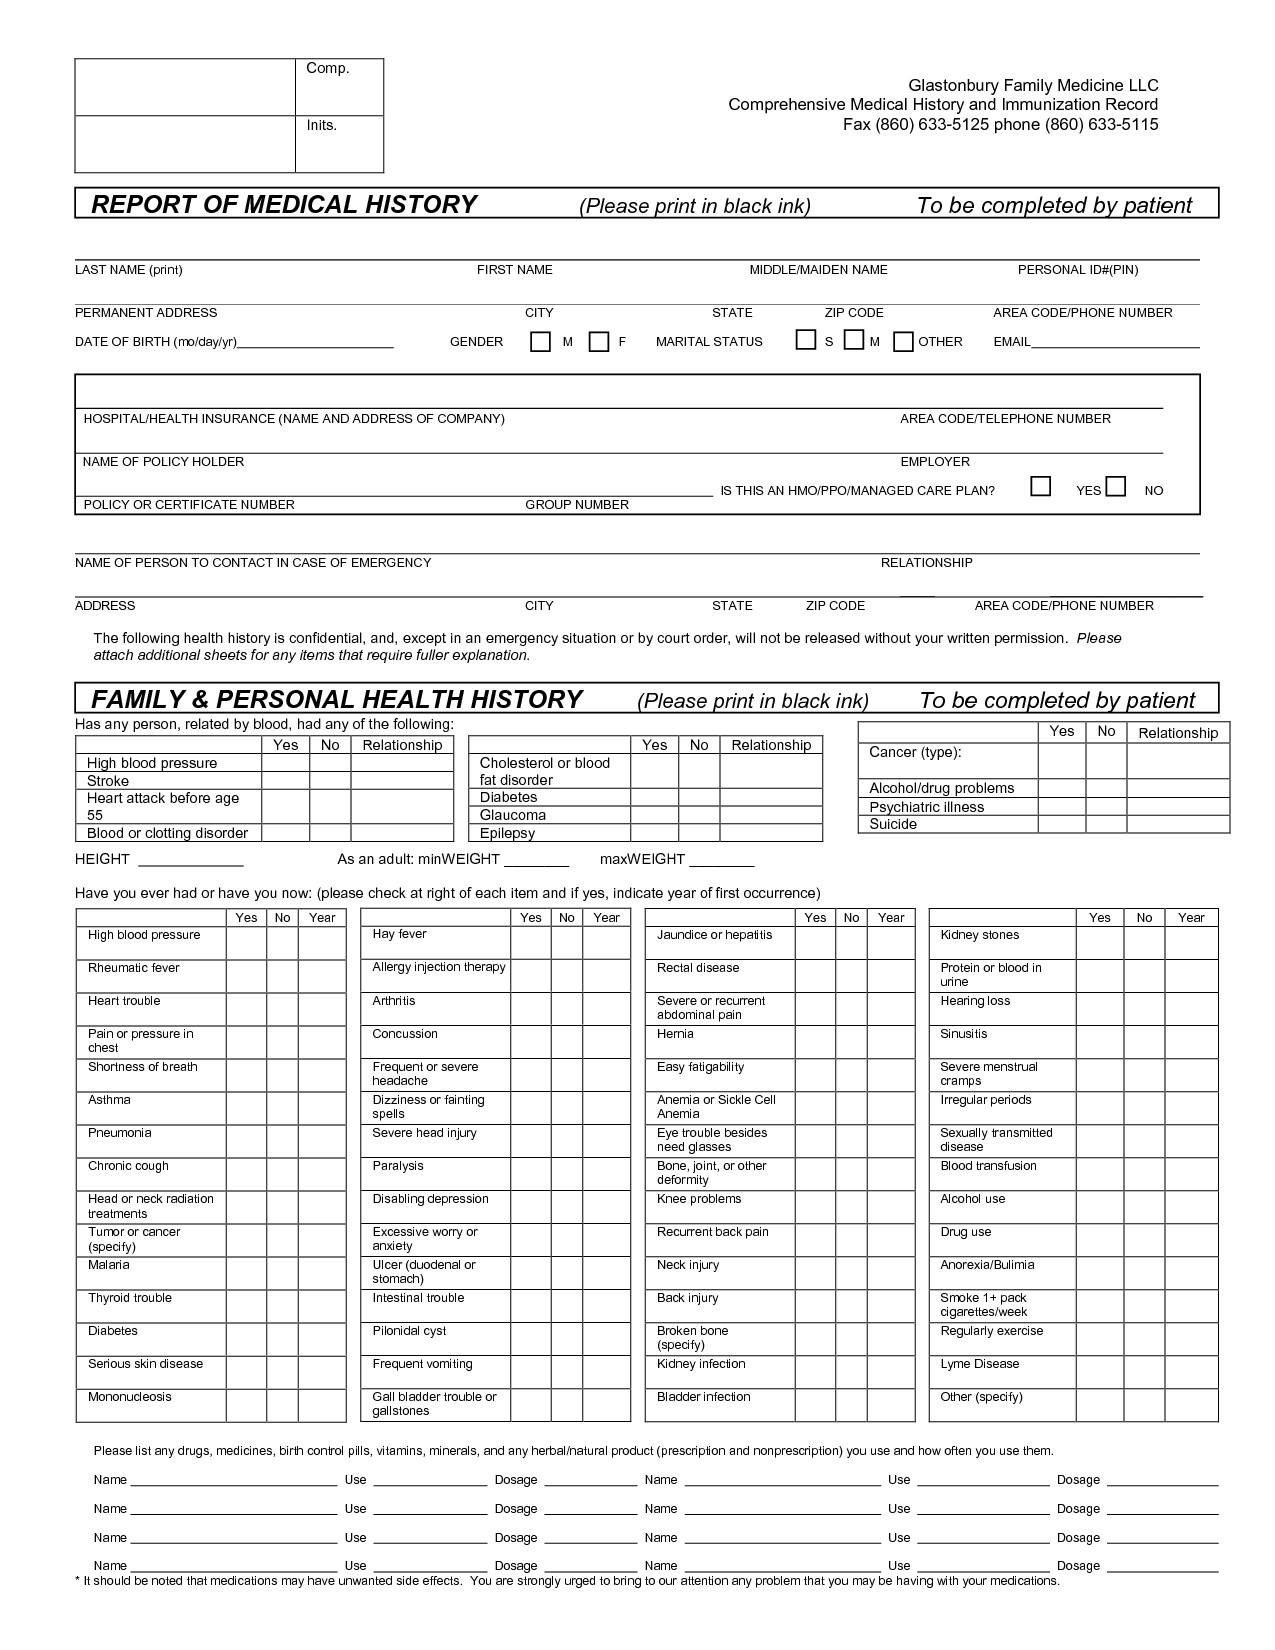 Personal Medical History Template Report Of Medical History Family Personal Health History